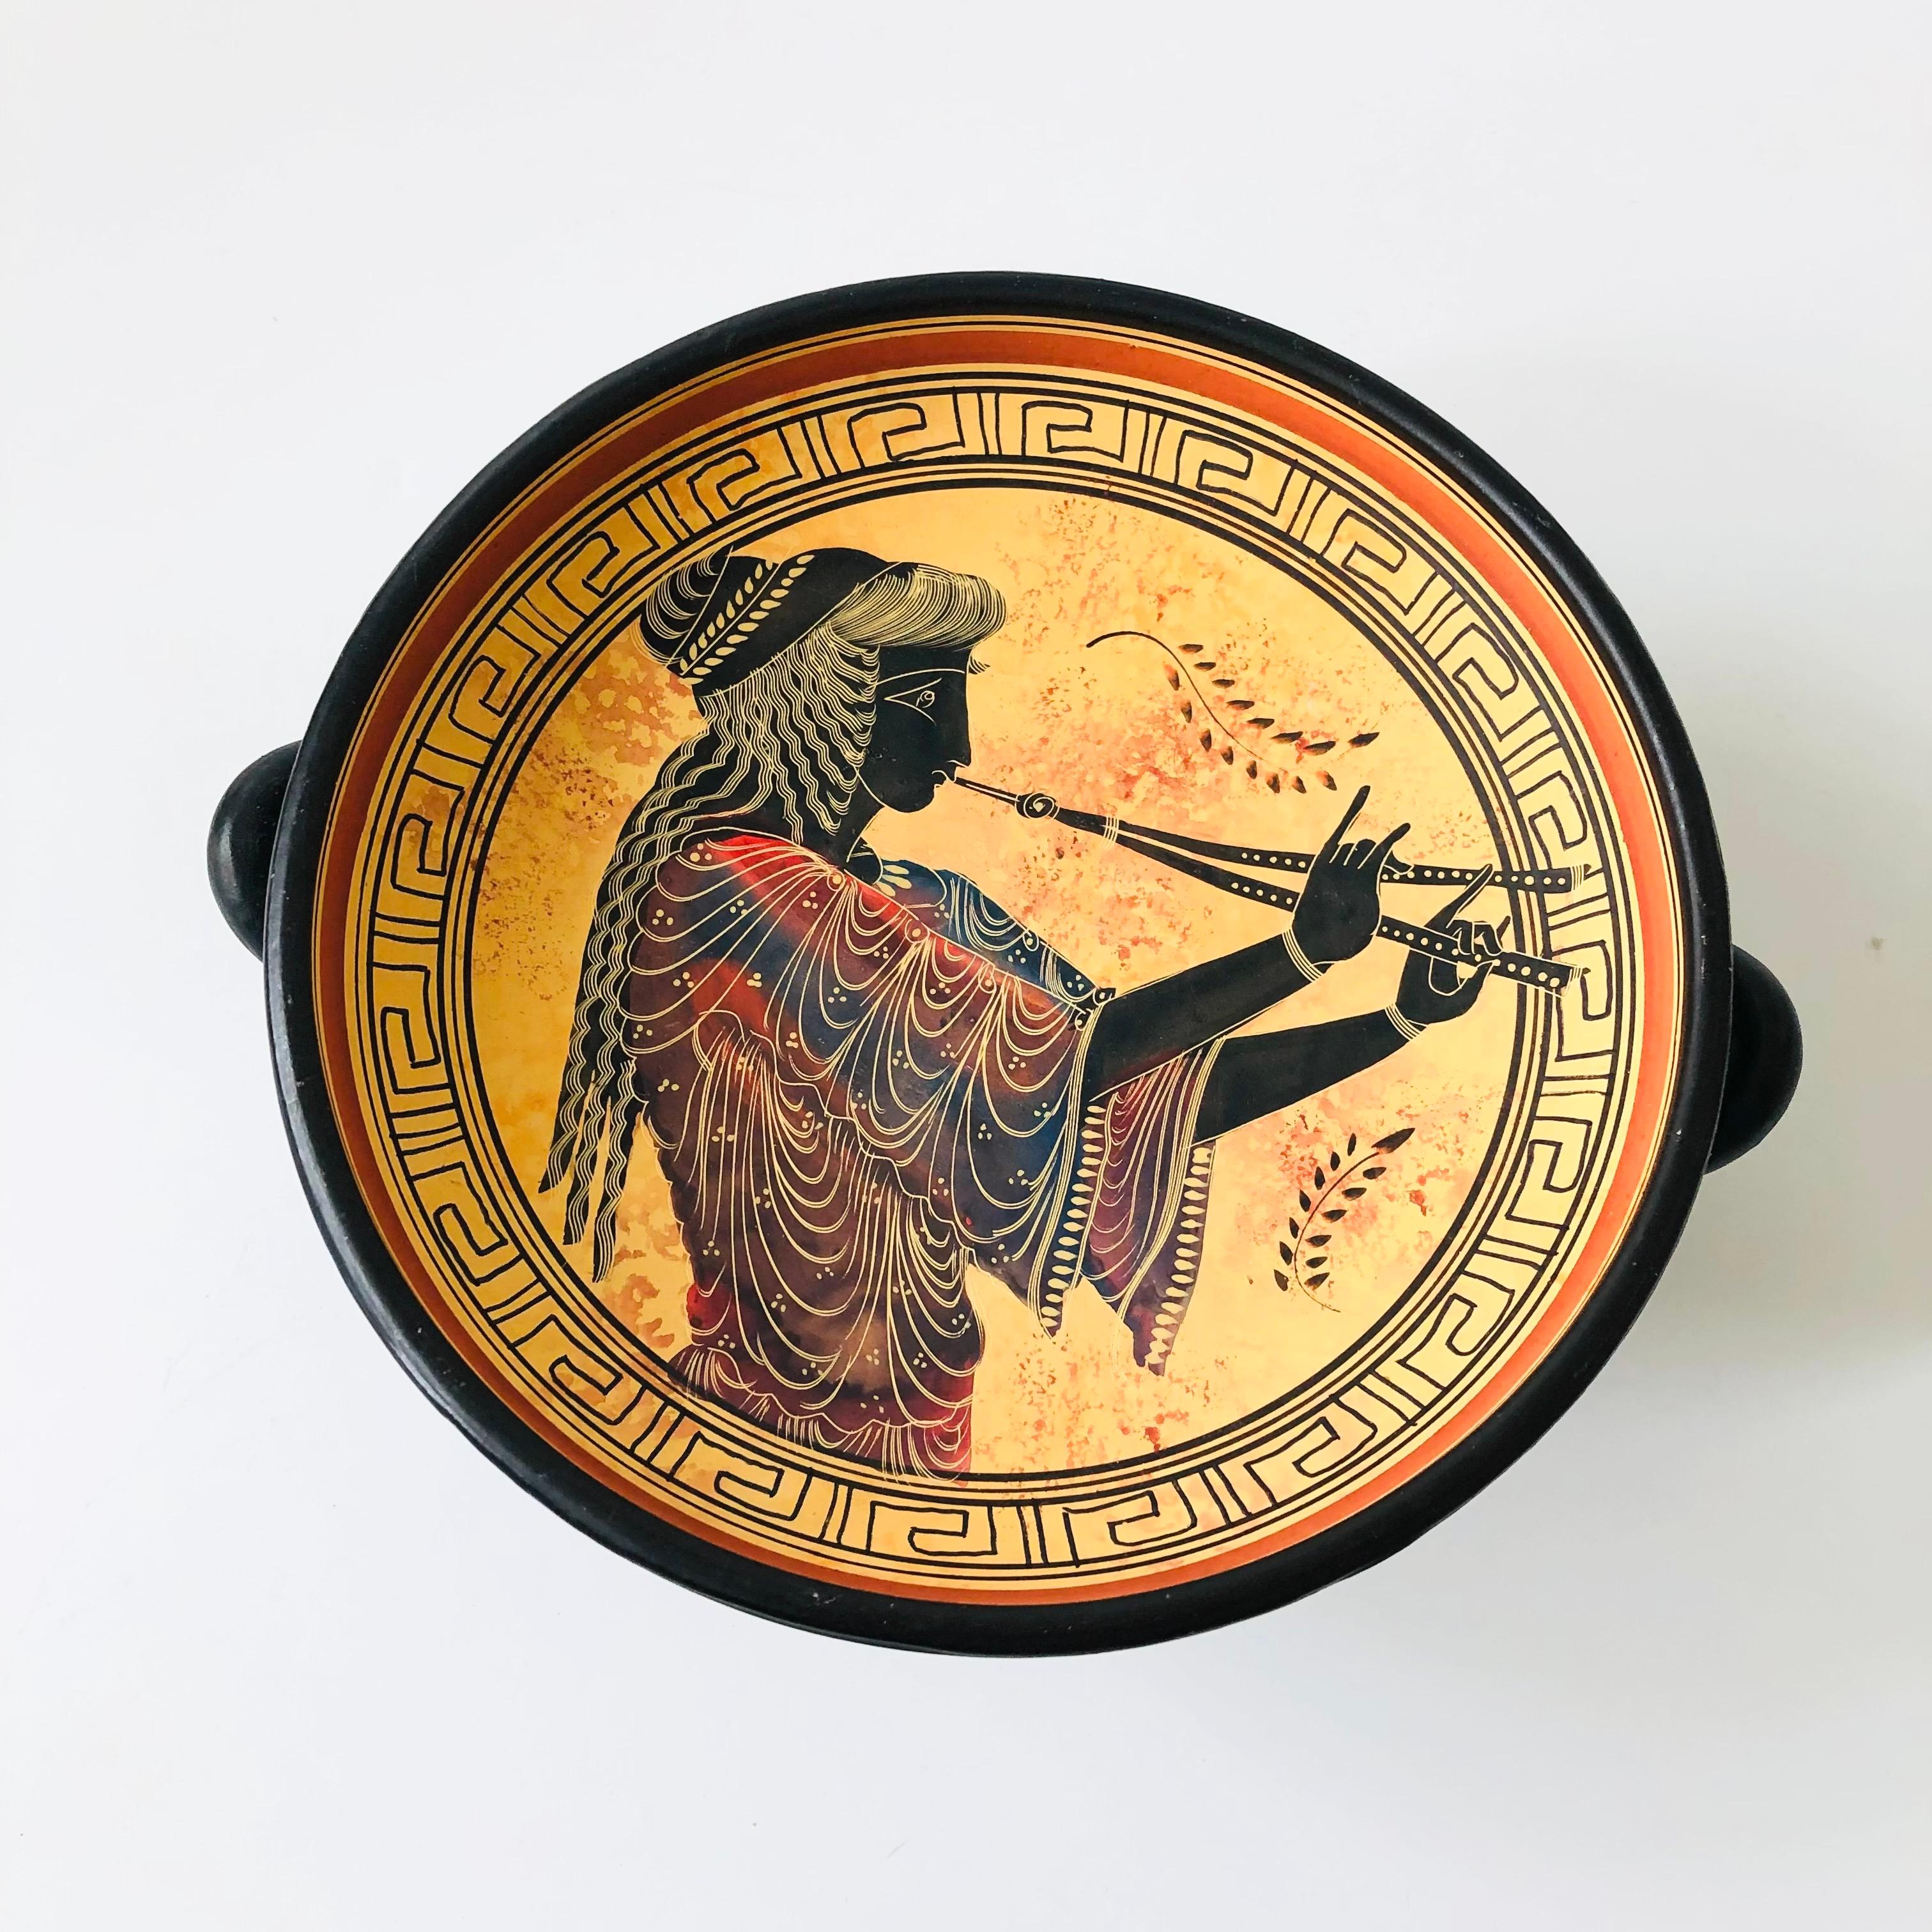 A vintage greek reproduction footed pottery bowl. Decorated with highly detailed hand painted designs throughout. Handles formed on the sides. Marked on the base.

